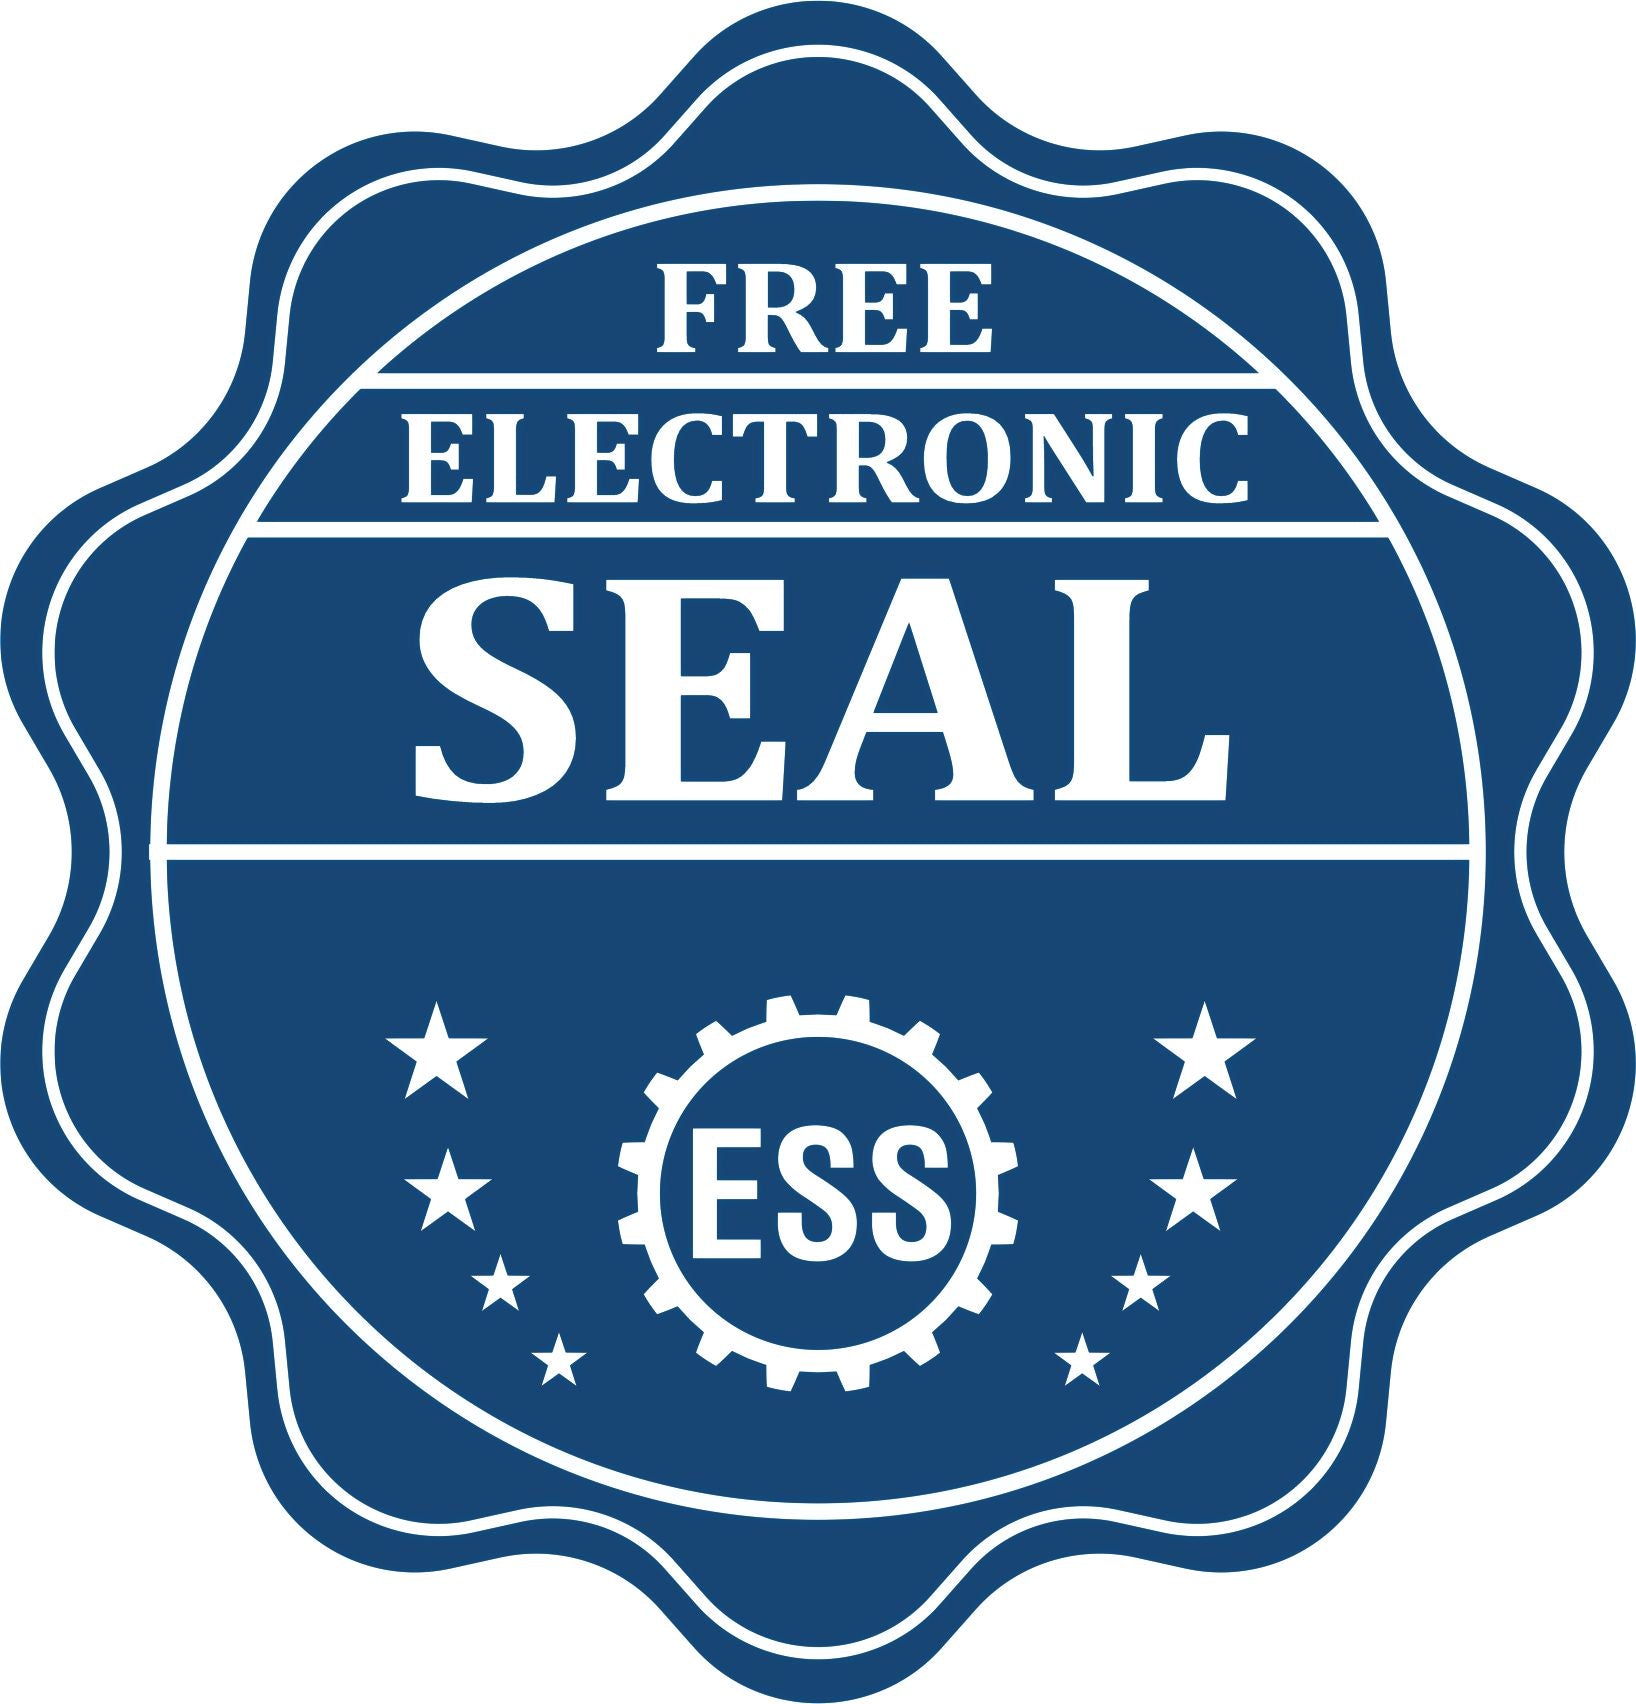 A badge showing a free electronic seal for the PSI Indiana Notary Stamp with stars and the ESS gear on the emblem.